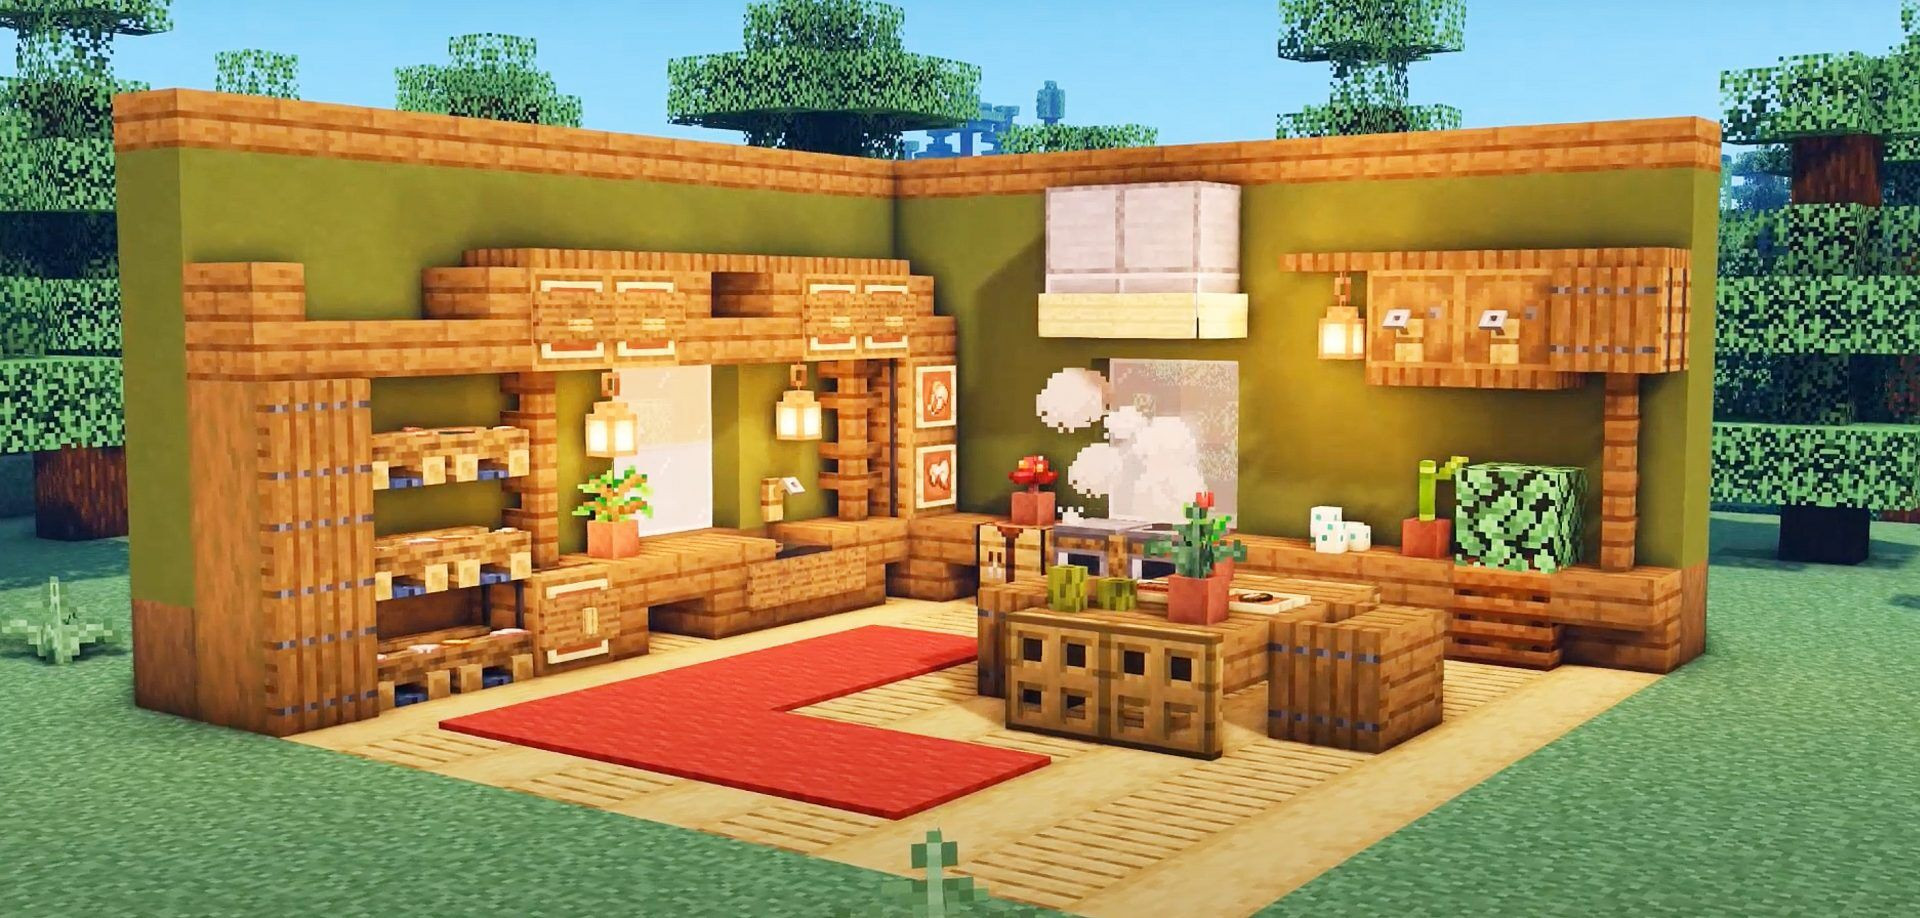 Minecraft Kitchen:  Best Ideas To Cook Up A Cool Build!